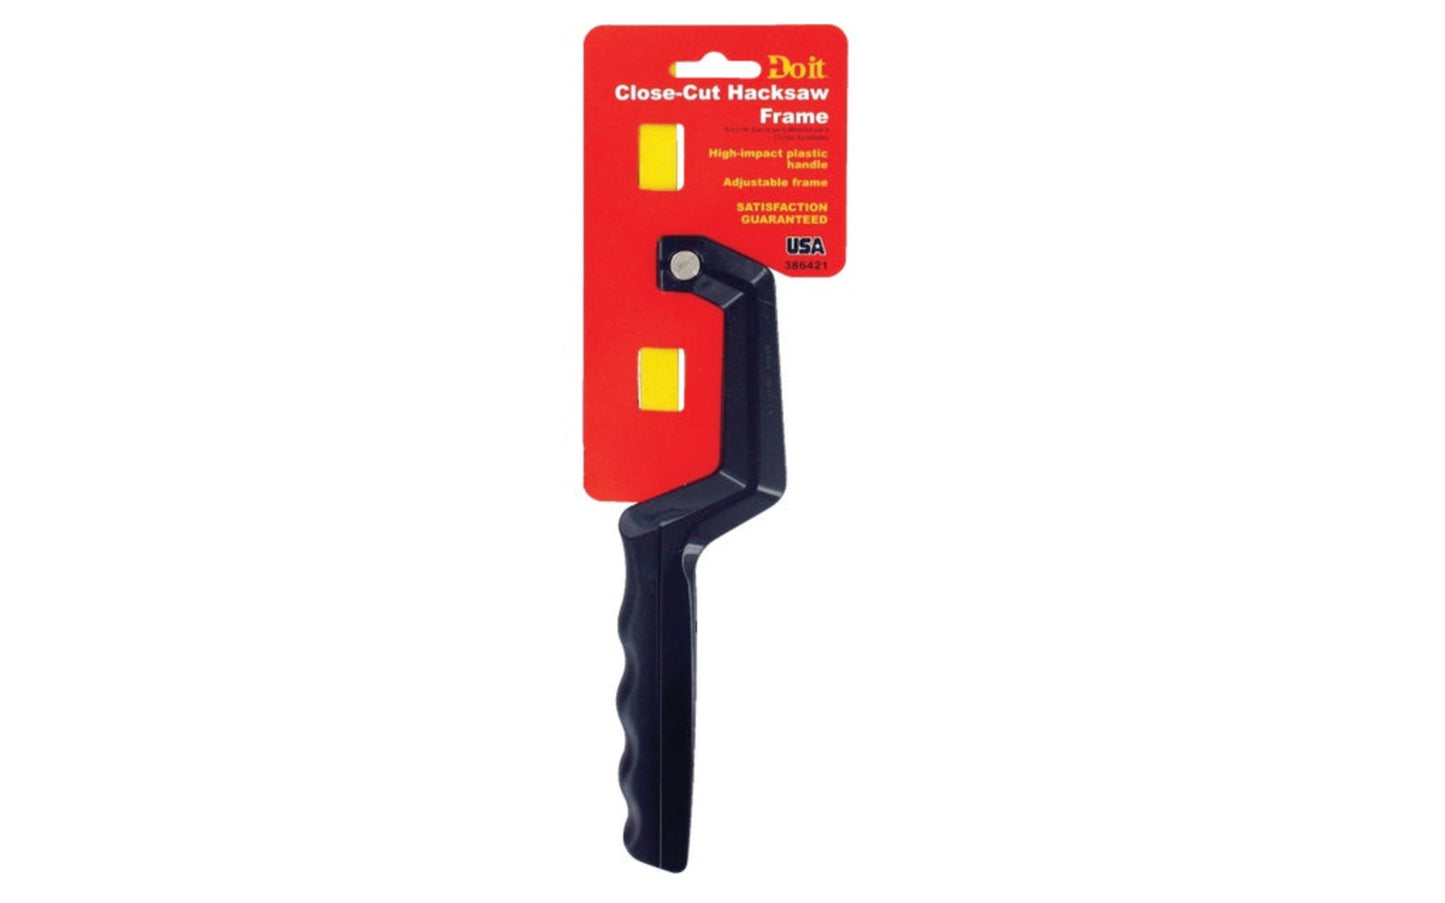 Composite plastic frame design for fine close work. High-impact plastic handle. Adjustable frame. Uses 10" or 12" blades. Includes one blade.   Made in USA.